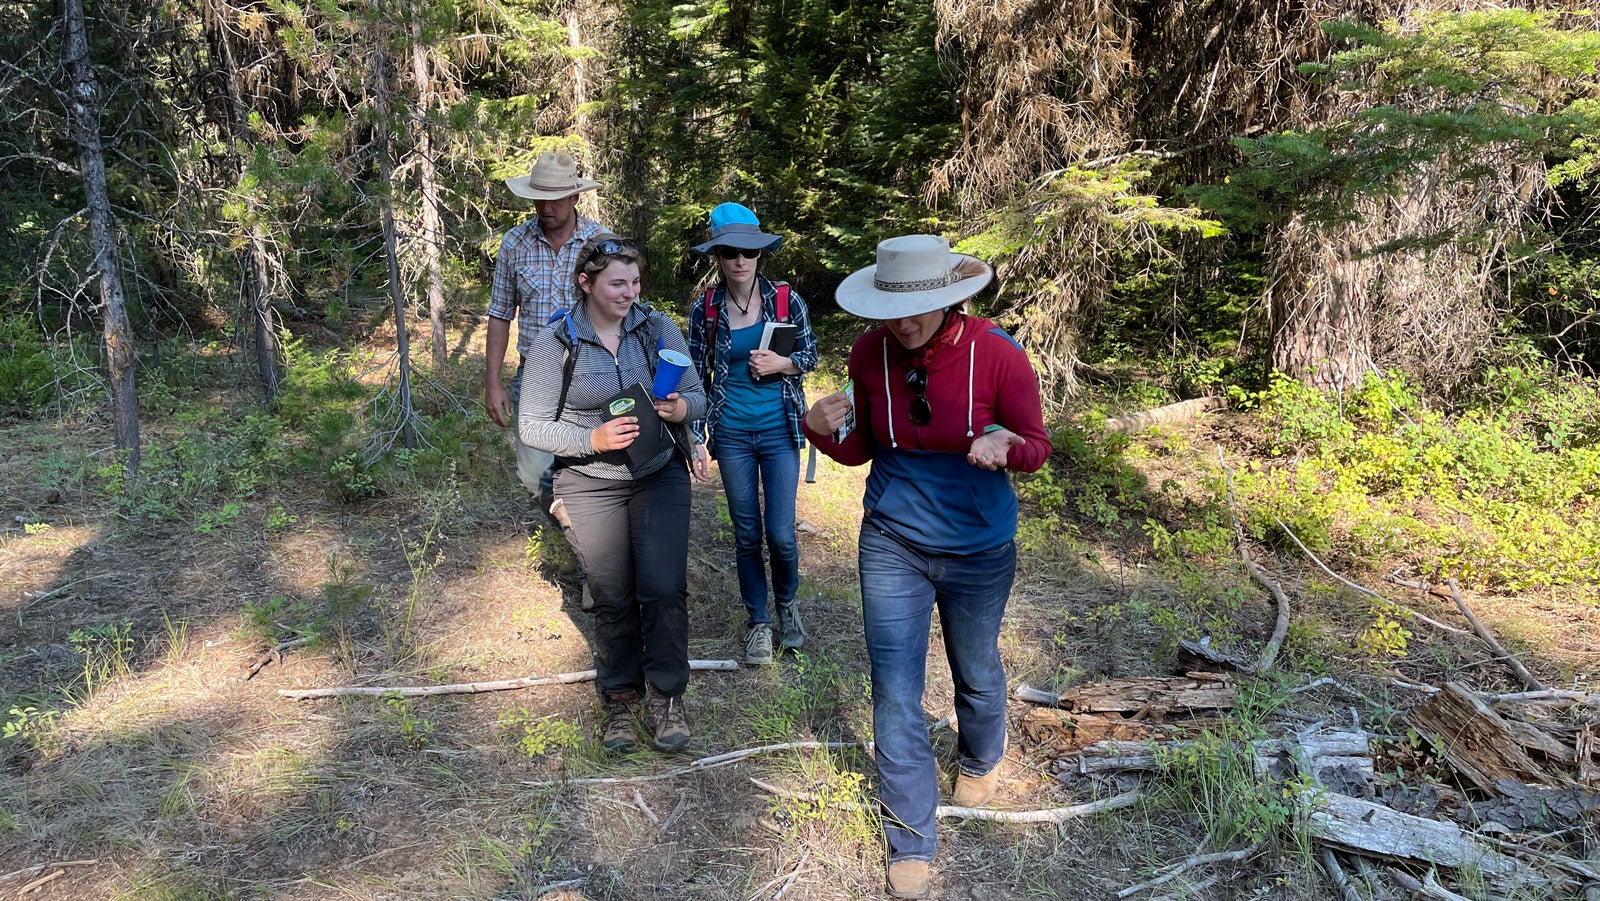 Boise State students at the working lands field school